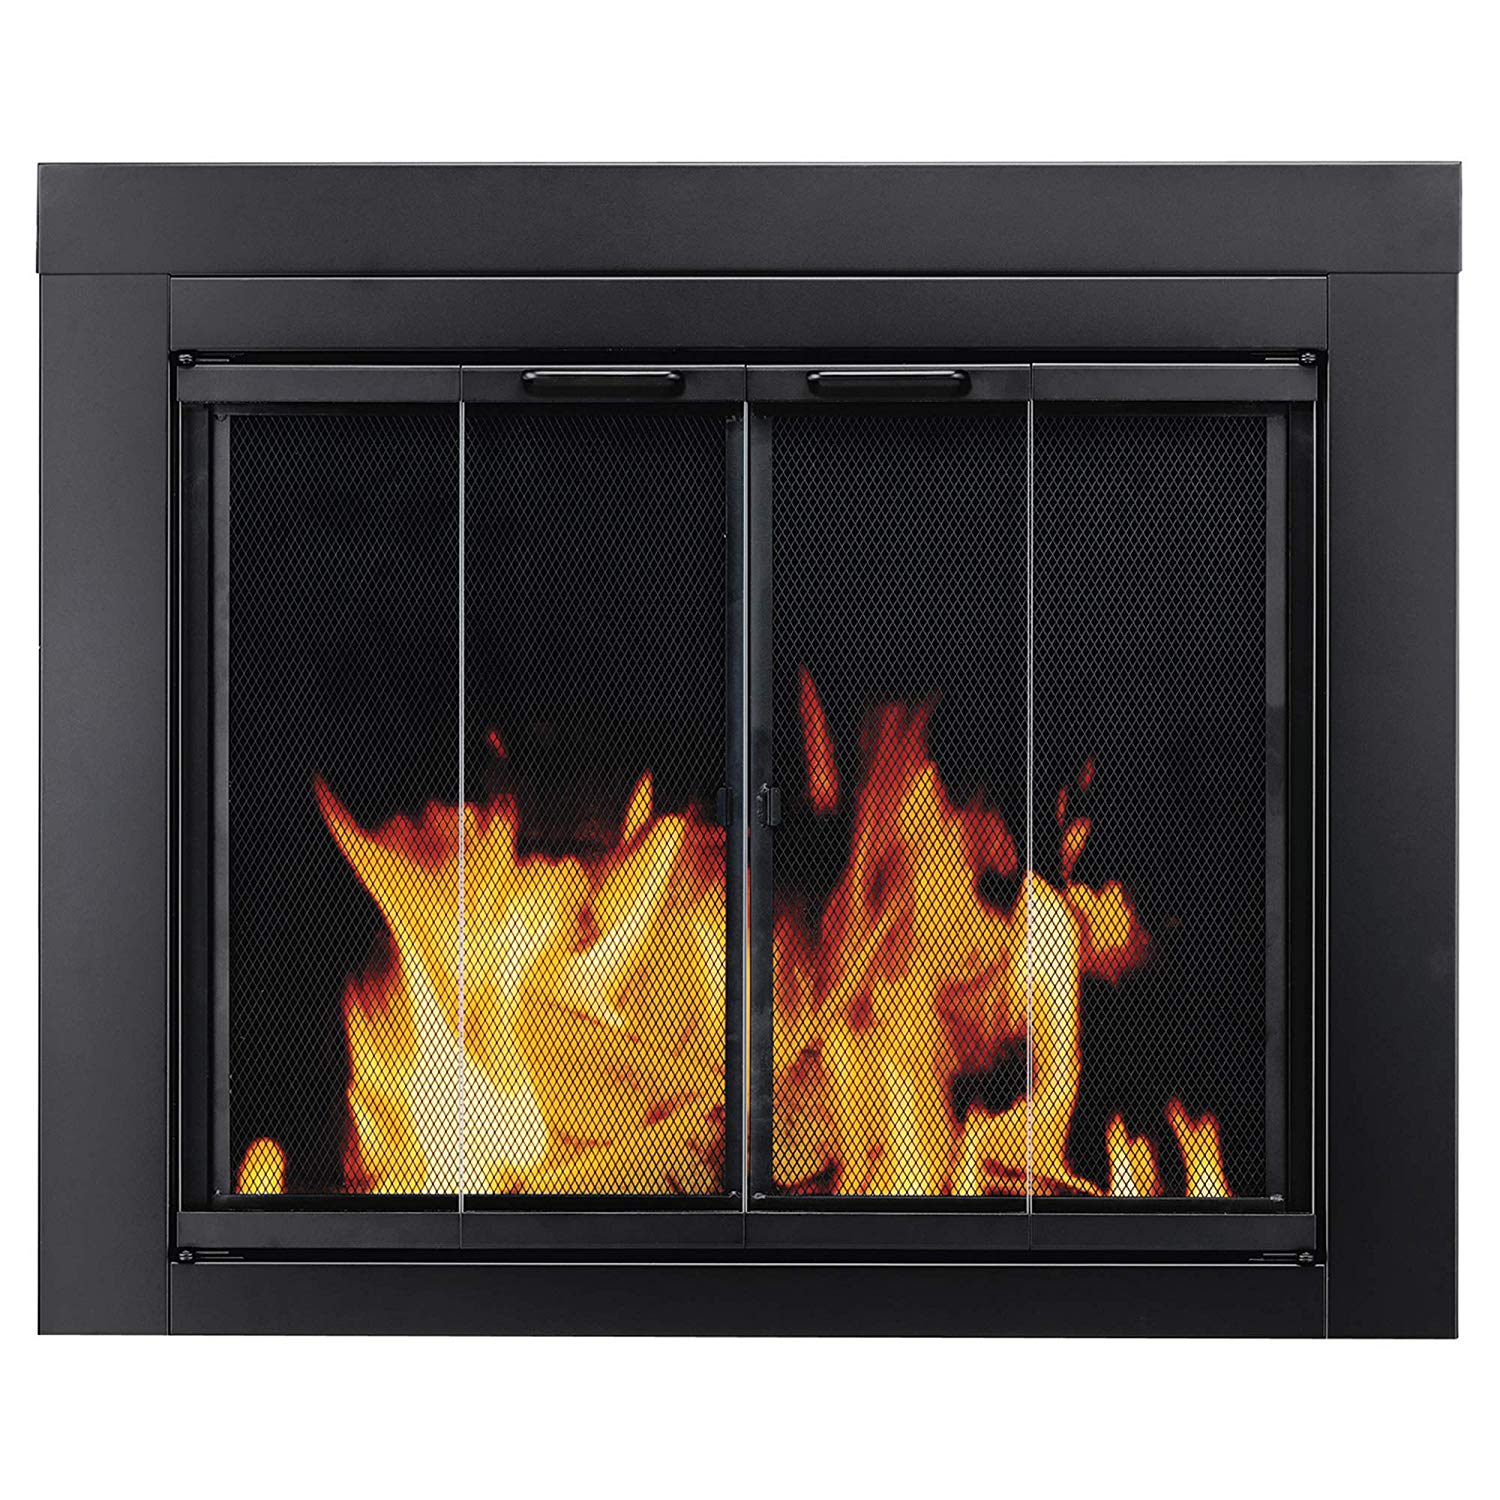 Ace Hardware Fireplace Best Of Pleasant Hearth at 1000 ascot Fireplace Glass Door Black Small